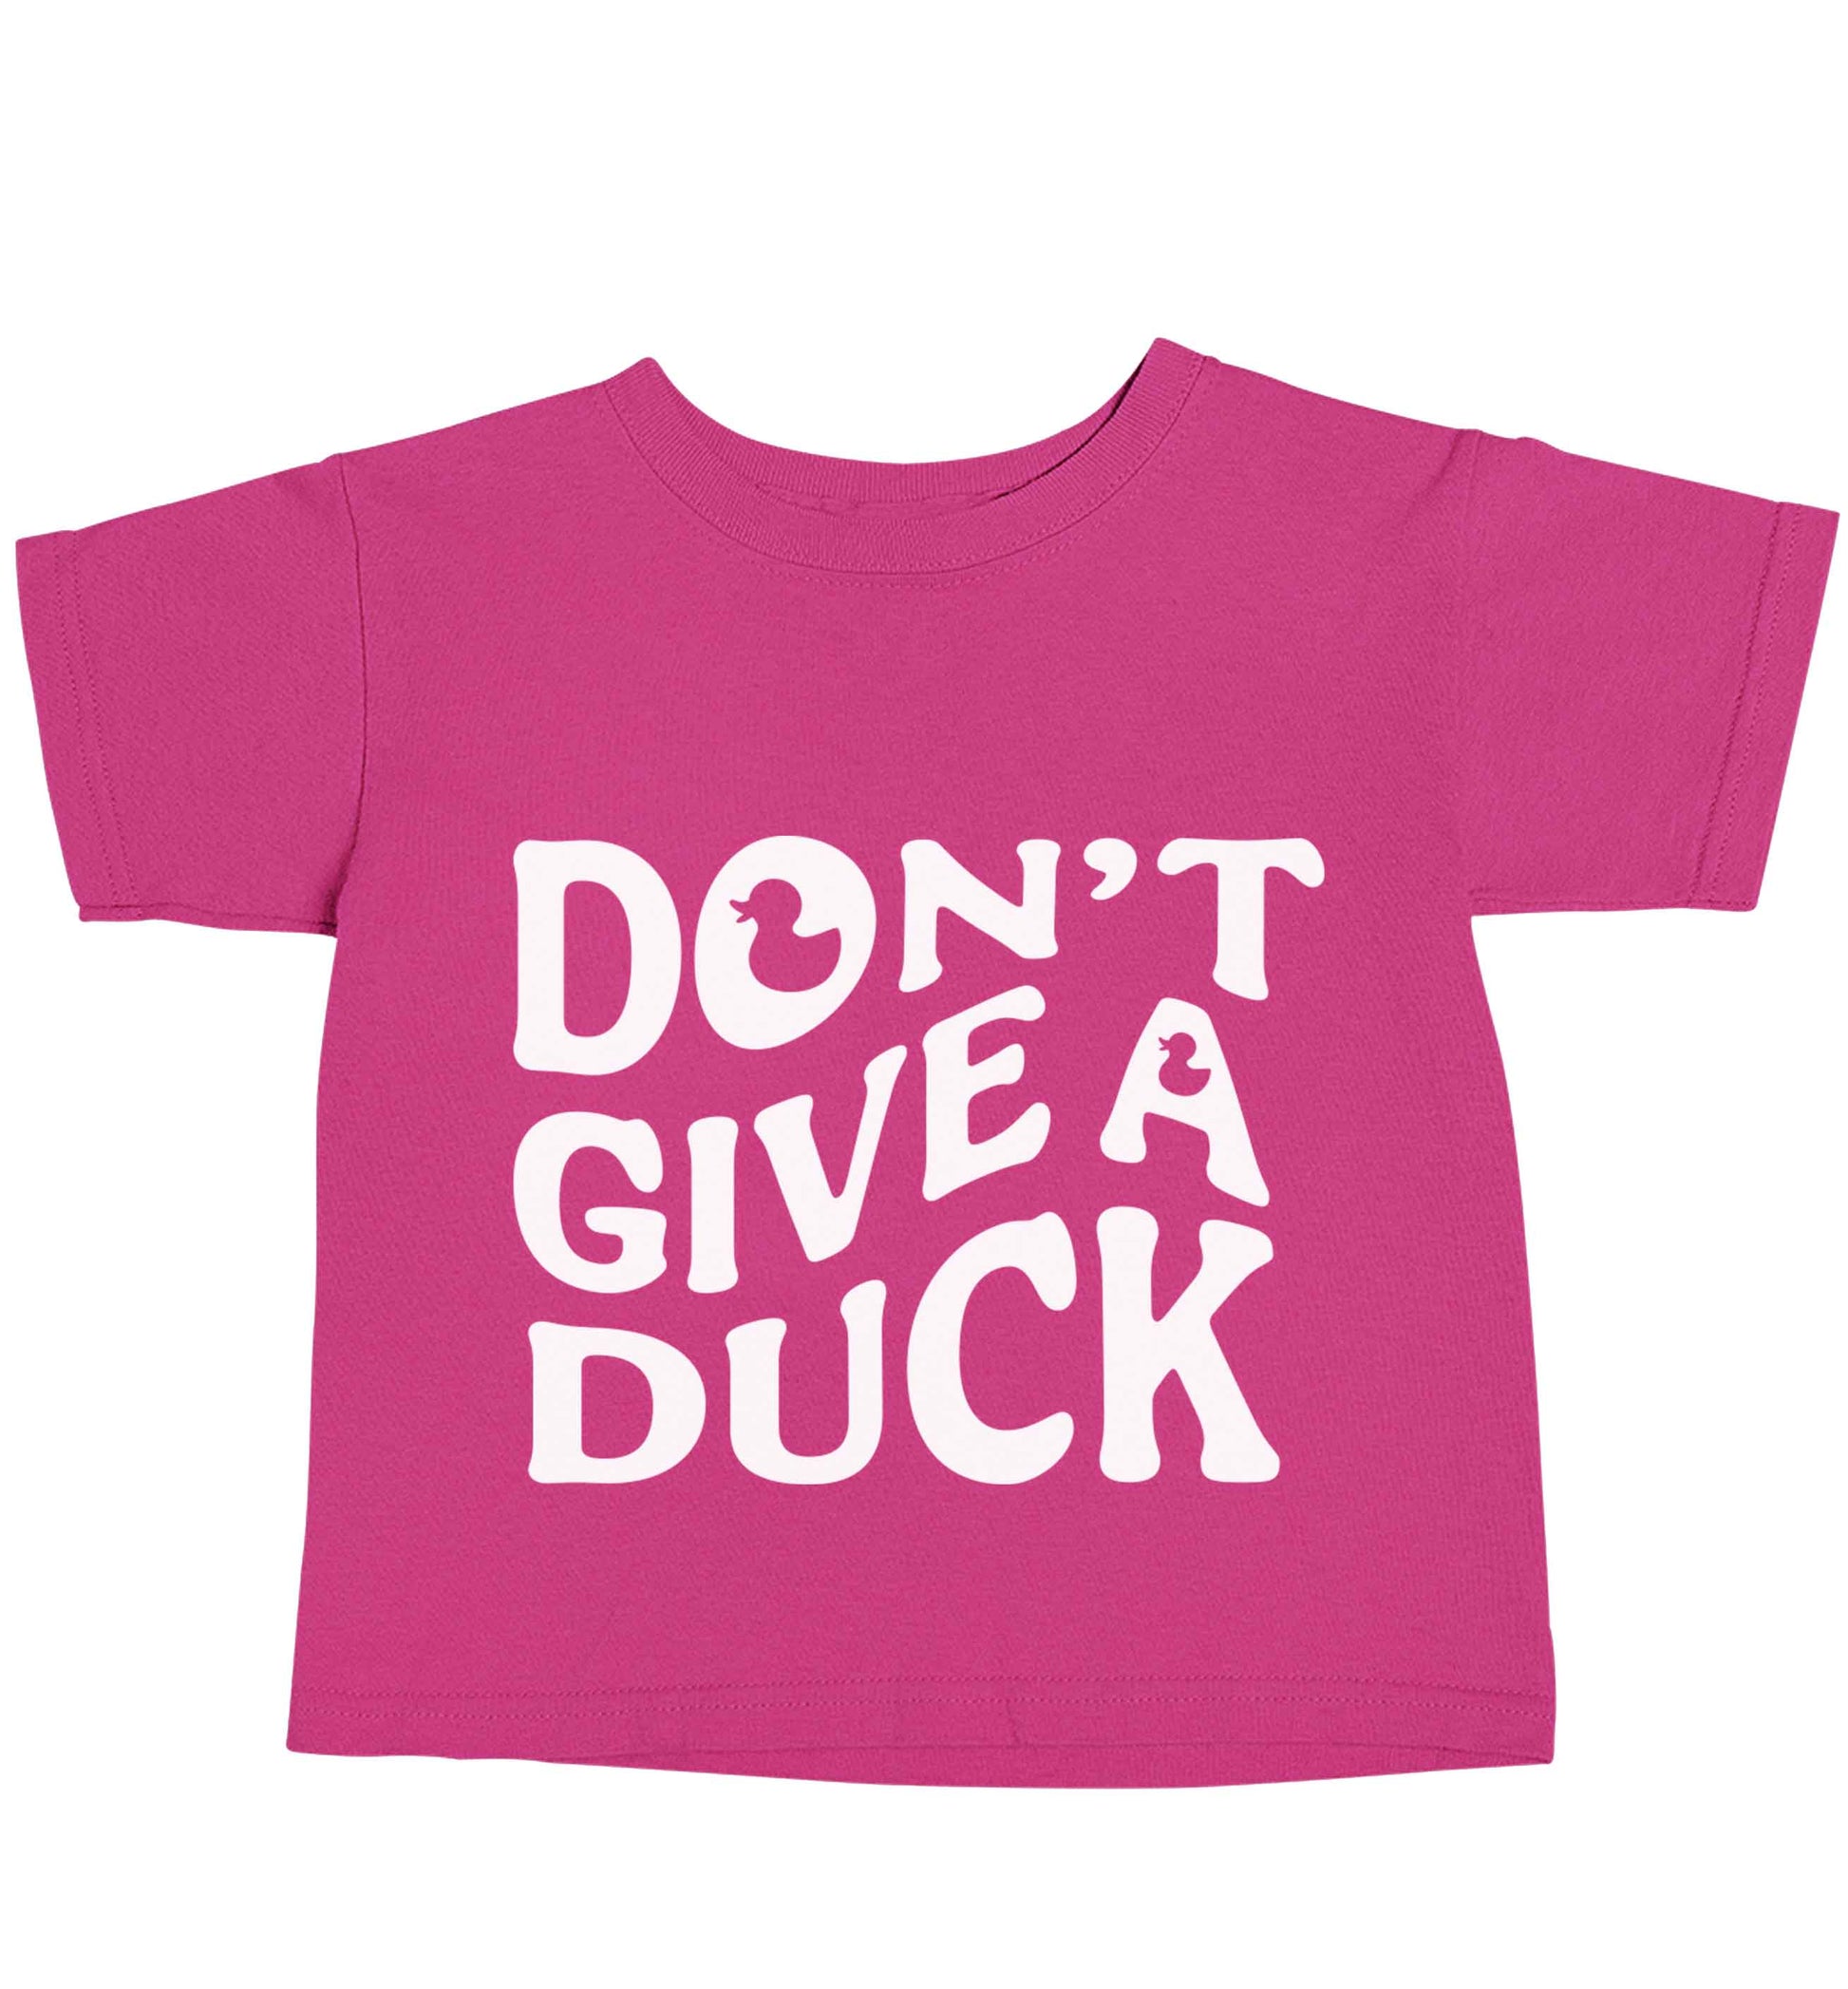 Don't give a duck pink baby toddler Tshirt 2 Years